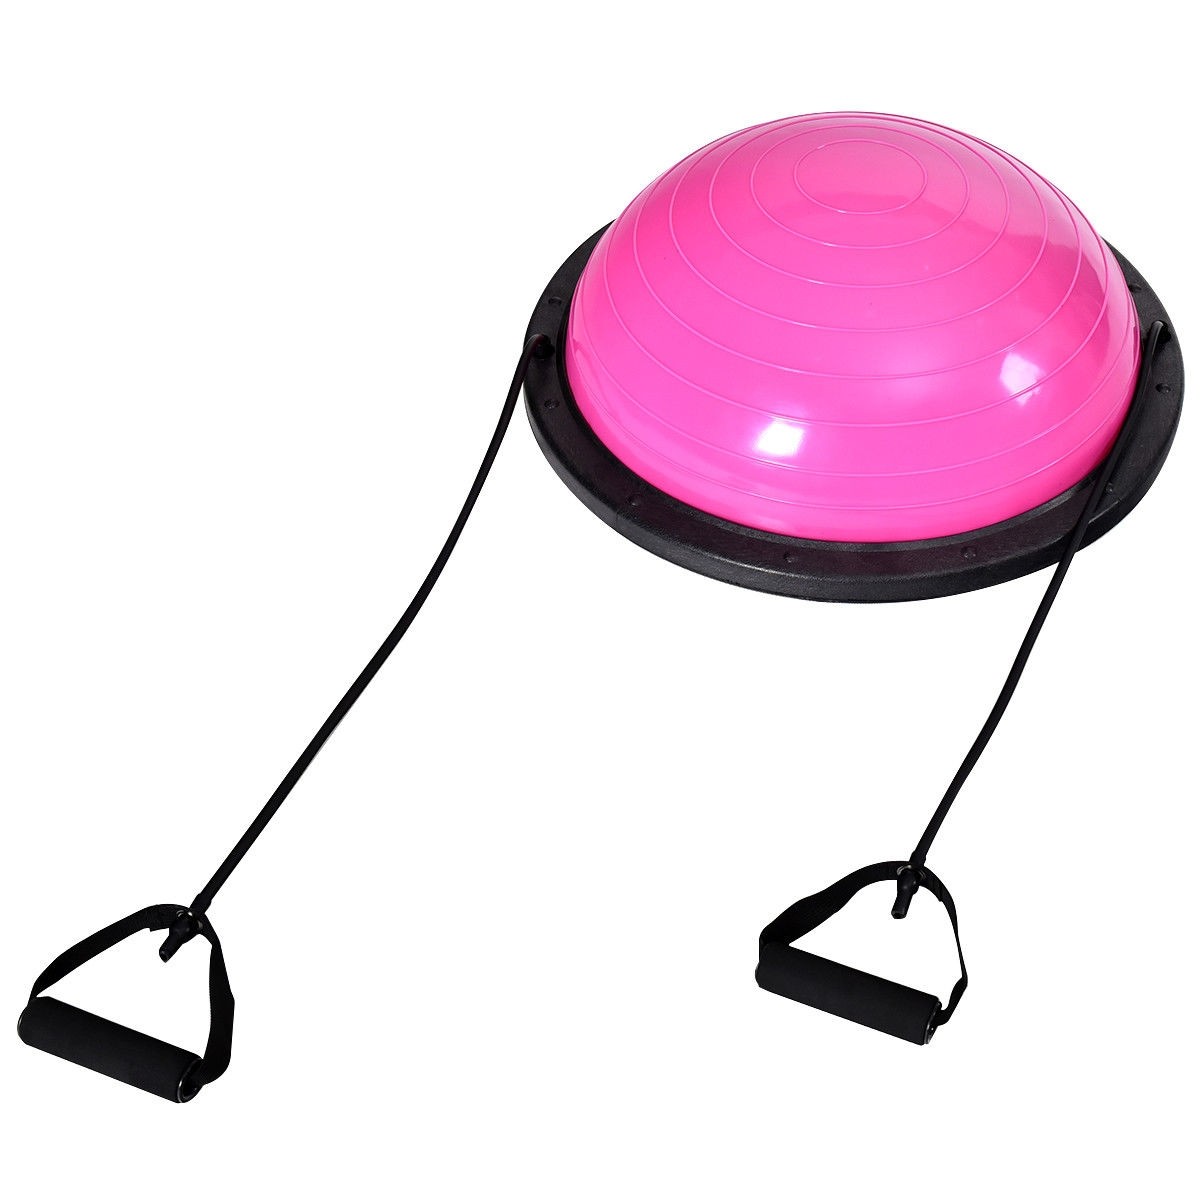 23 In. Exercise Yoga Ball Balance Trainer With Pump